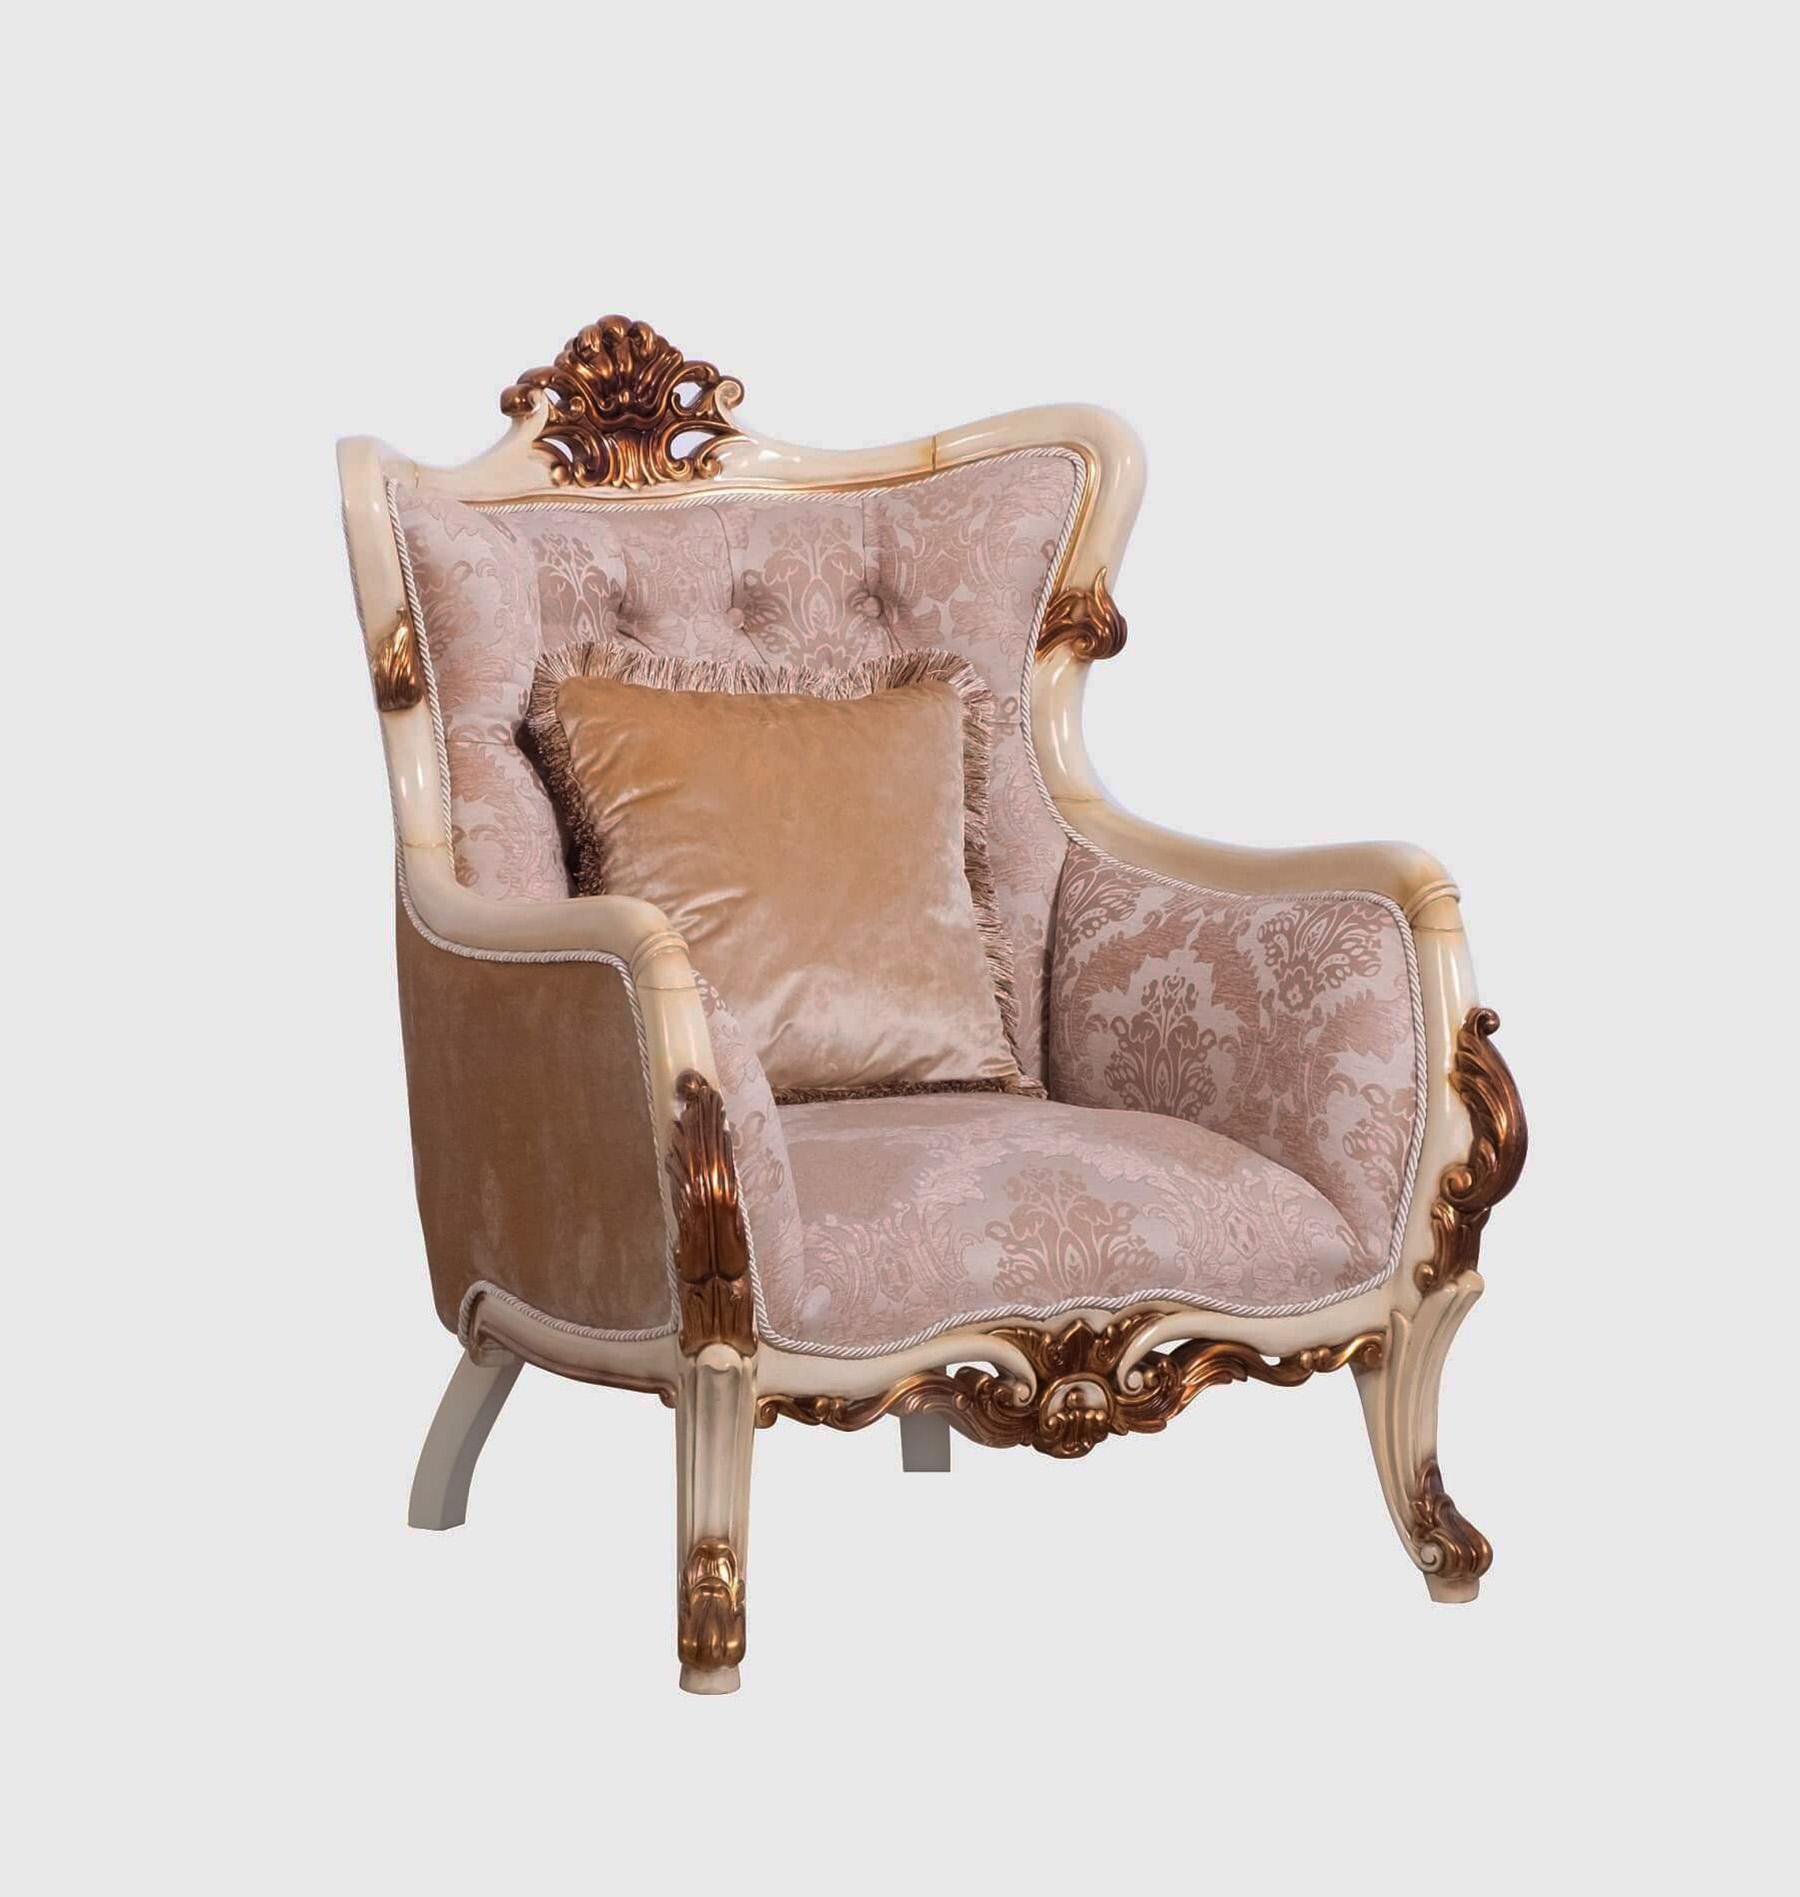 Classic, Traditional Arm Chair VERONICA 47075-C in Antique, Gold, Beige Fabric